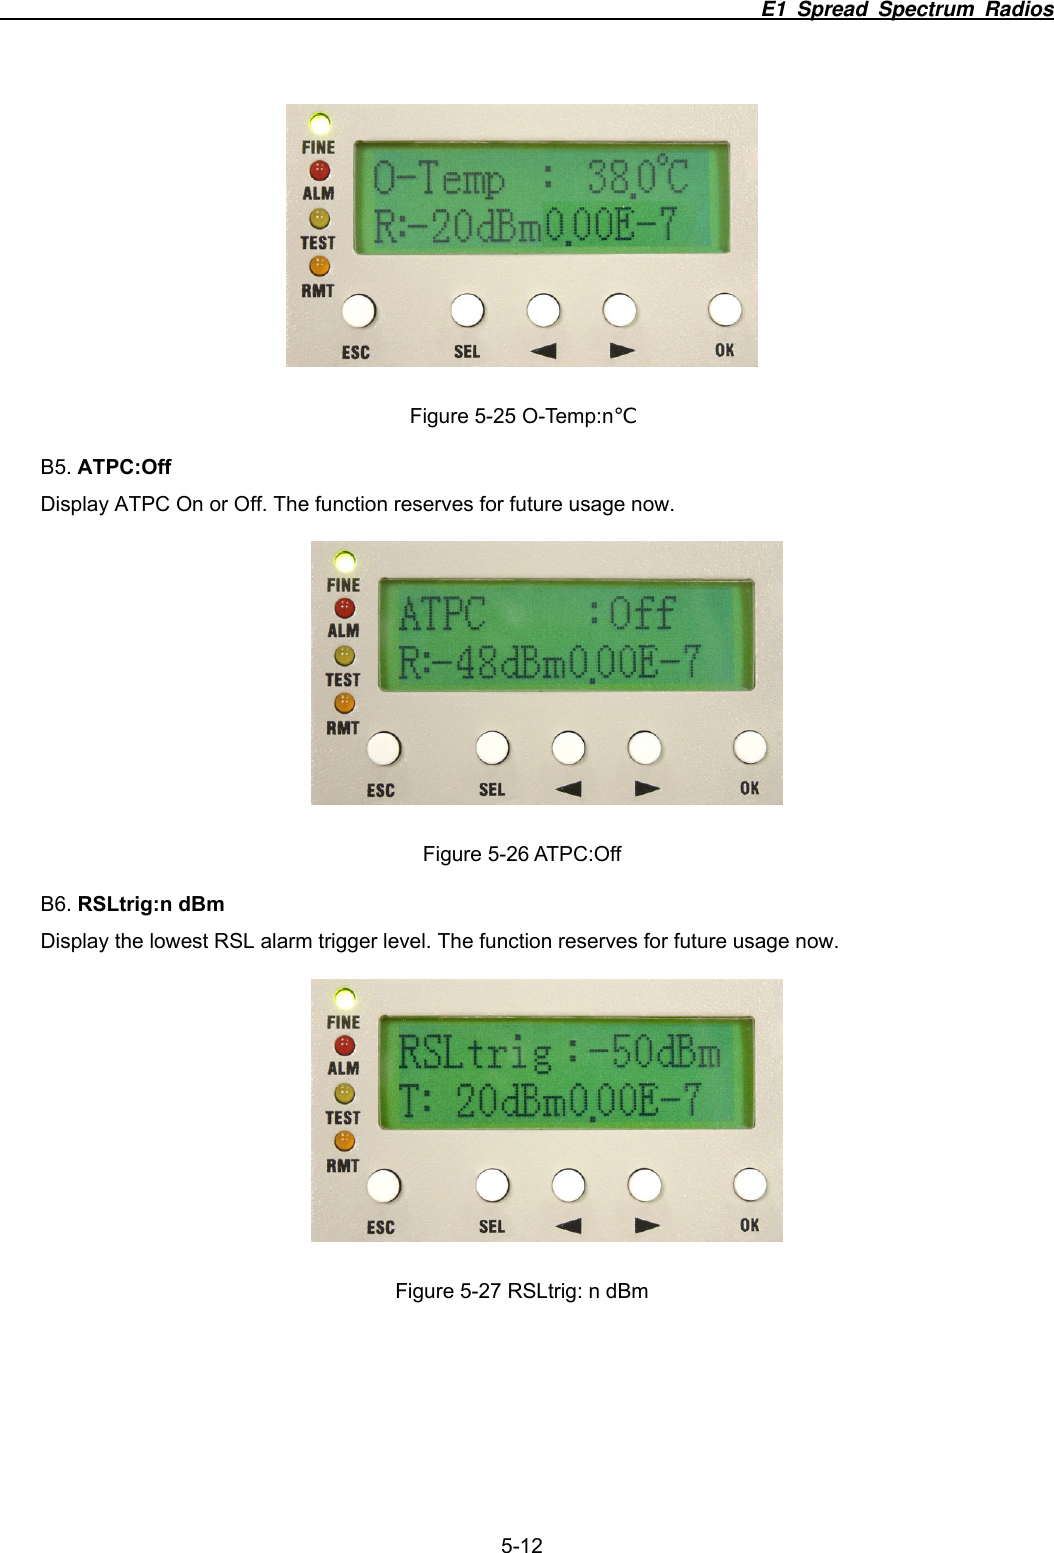                                                                          E1 Spread Spectrum Radios              5-12  Figure 5-25 O-Temp:n℃ B5. ATPC:Off Display ATPC On or Off. The function reserves for future usage now.  Figure 5-26 ATPC:Off B6. RSLtrig:n dBm Display the lowest RSL alarm trigger level. The function reserves for future usage now.  Figure 5-27 RSLtrig: n dBm 